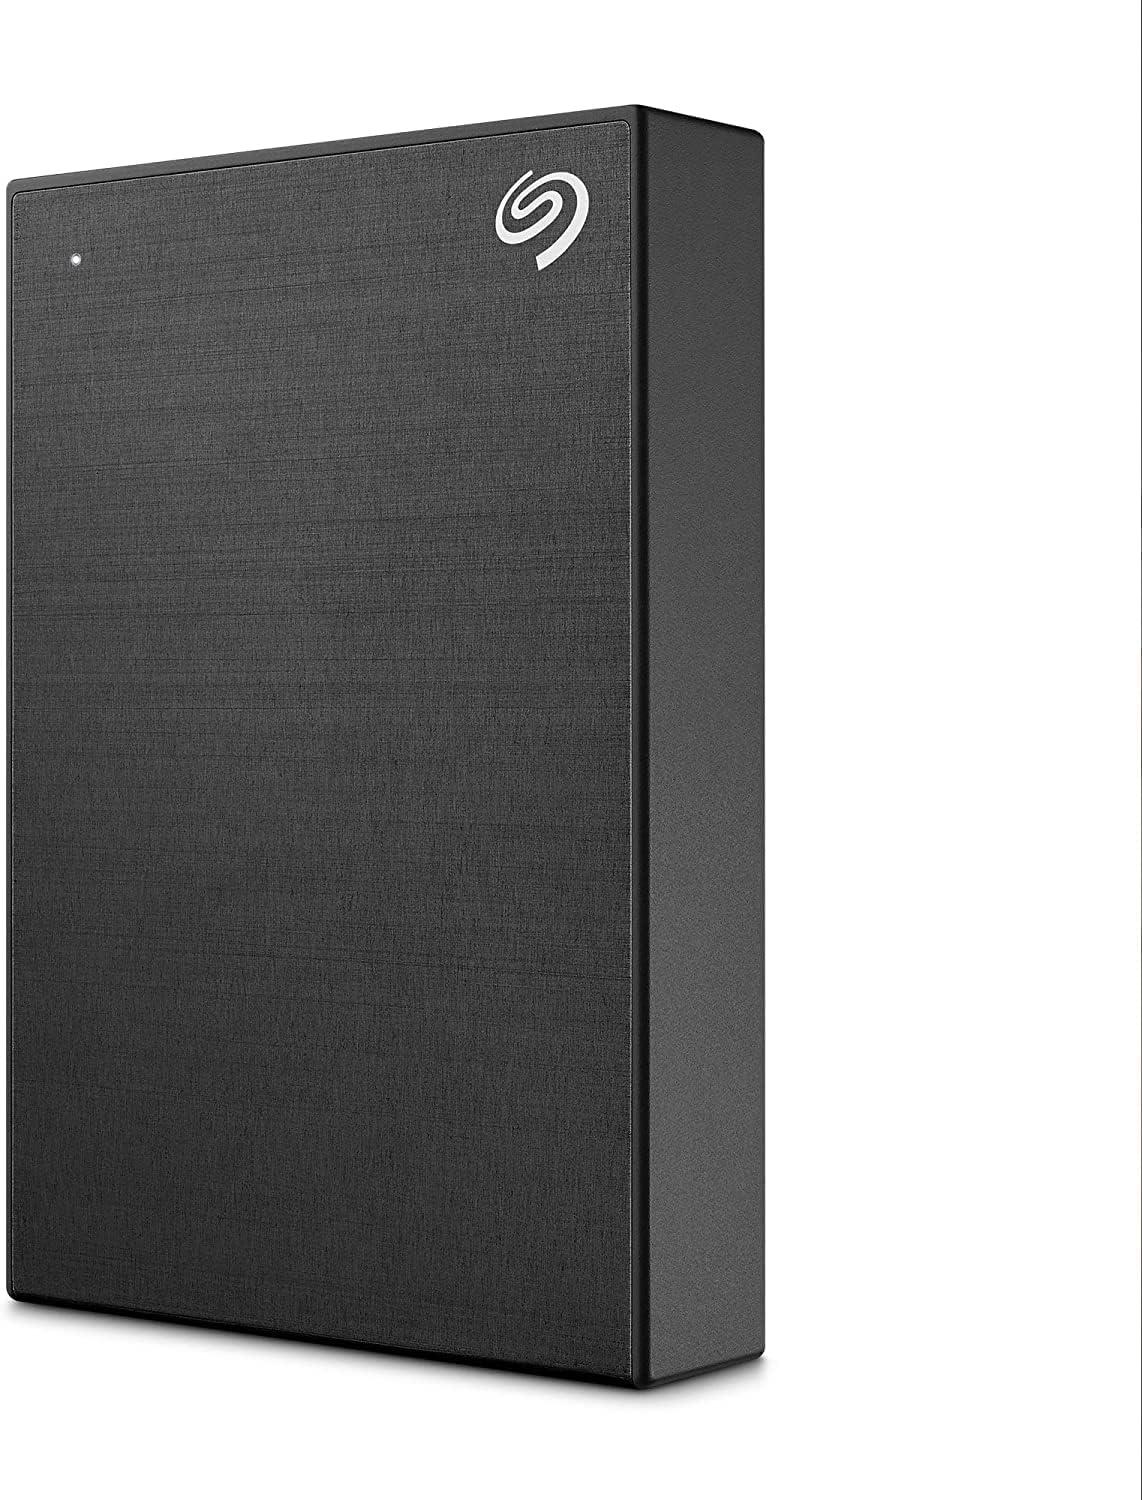 ONETOUCH WITH PASSWORDABLACK EXTERNAL DRIVE USB 3.0 1TB